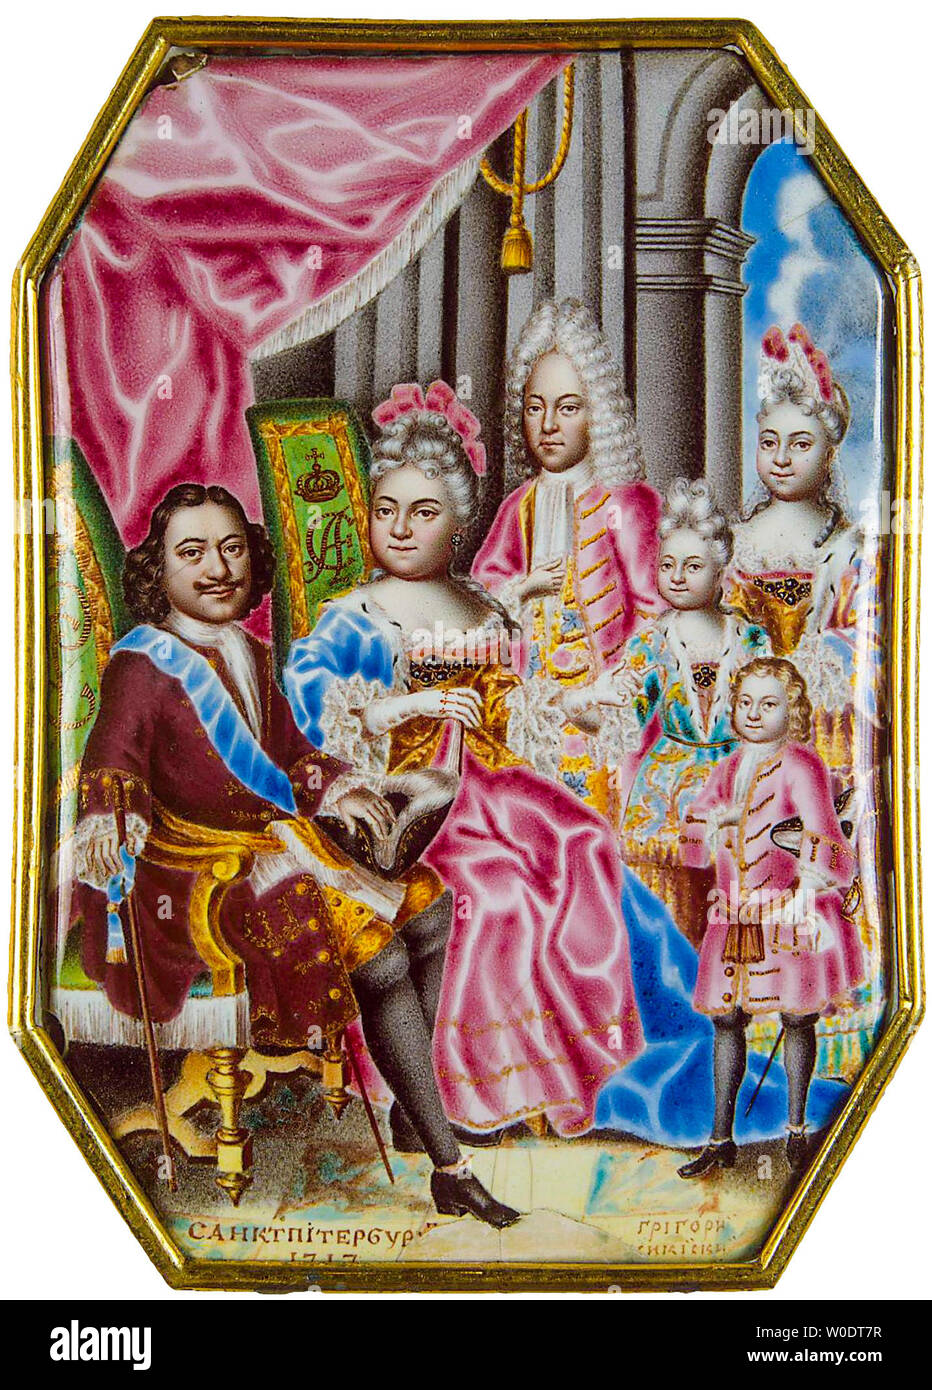 Grigory Musikijsky, Peter the Great, (1672-1725), family portrait miniature, painting, circa 1716 Stock Photo